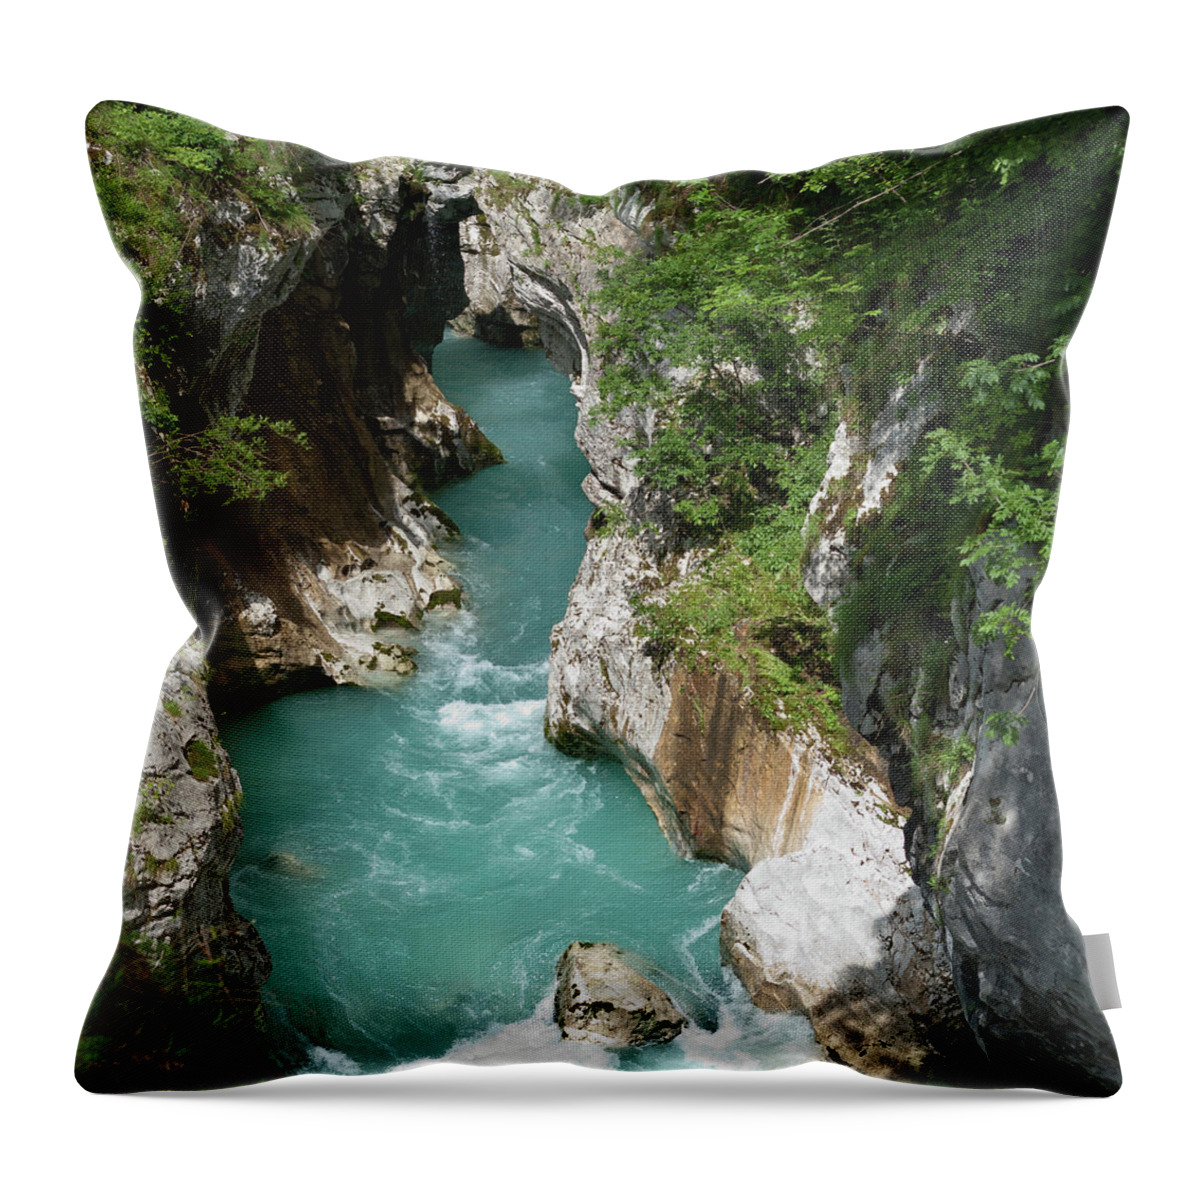 Scenics Throw Pillow featuring the photograph Soca River Slovenia Ravine by Hiphunter